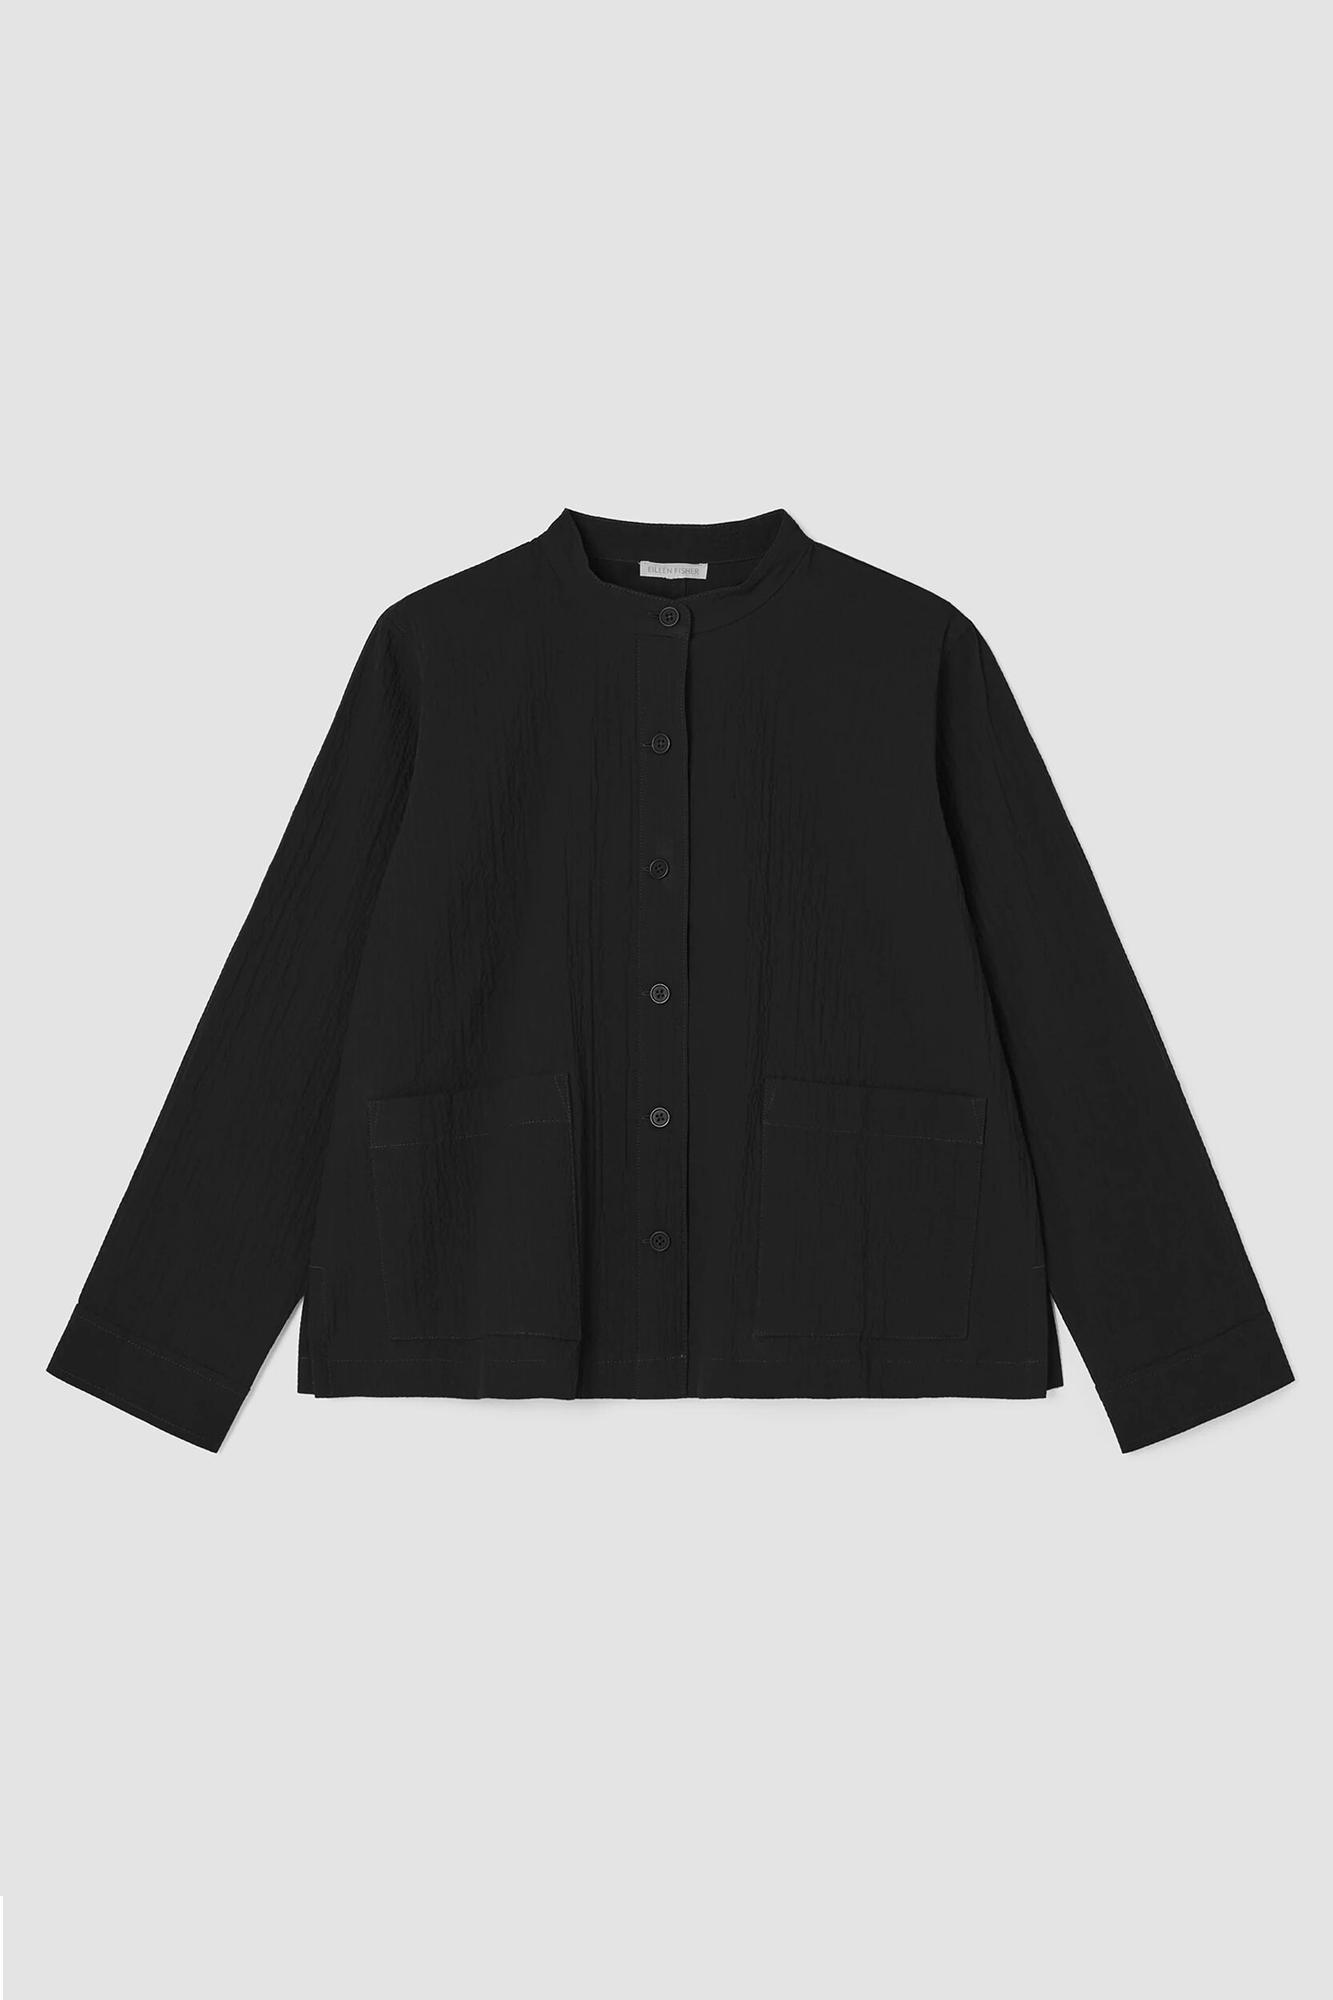 This Man Collar Shirt Jacket from Eileen Fisher is crafted from premium cotton blend fabric, making it comfortable and breathable